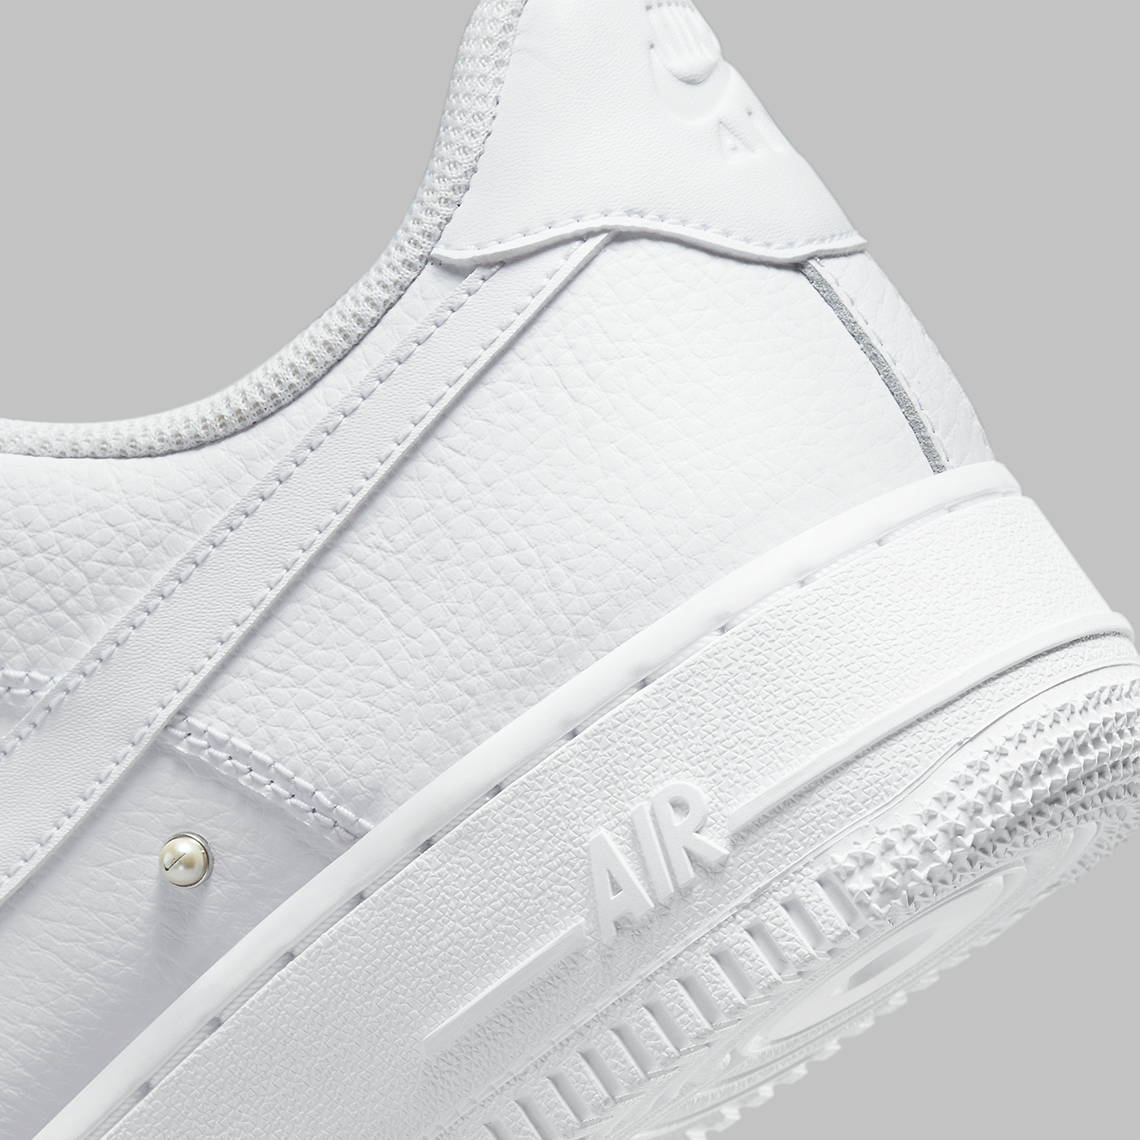 Nike Air Force 1 Low Pearls Dq0231 100 Release Date 8